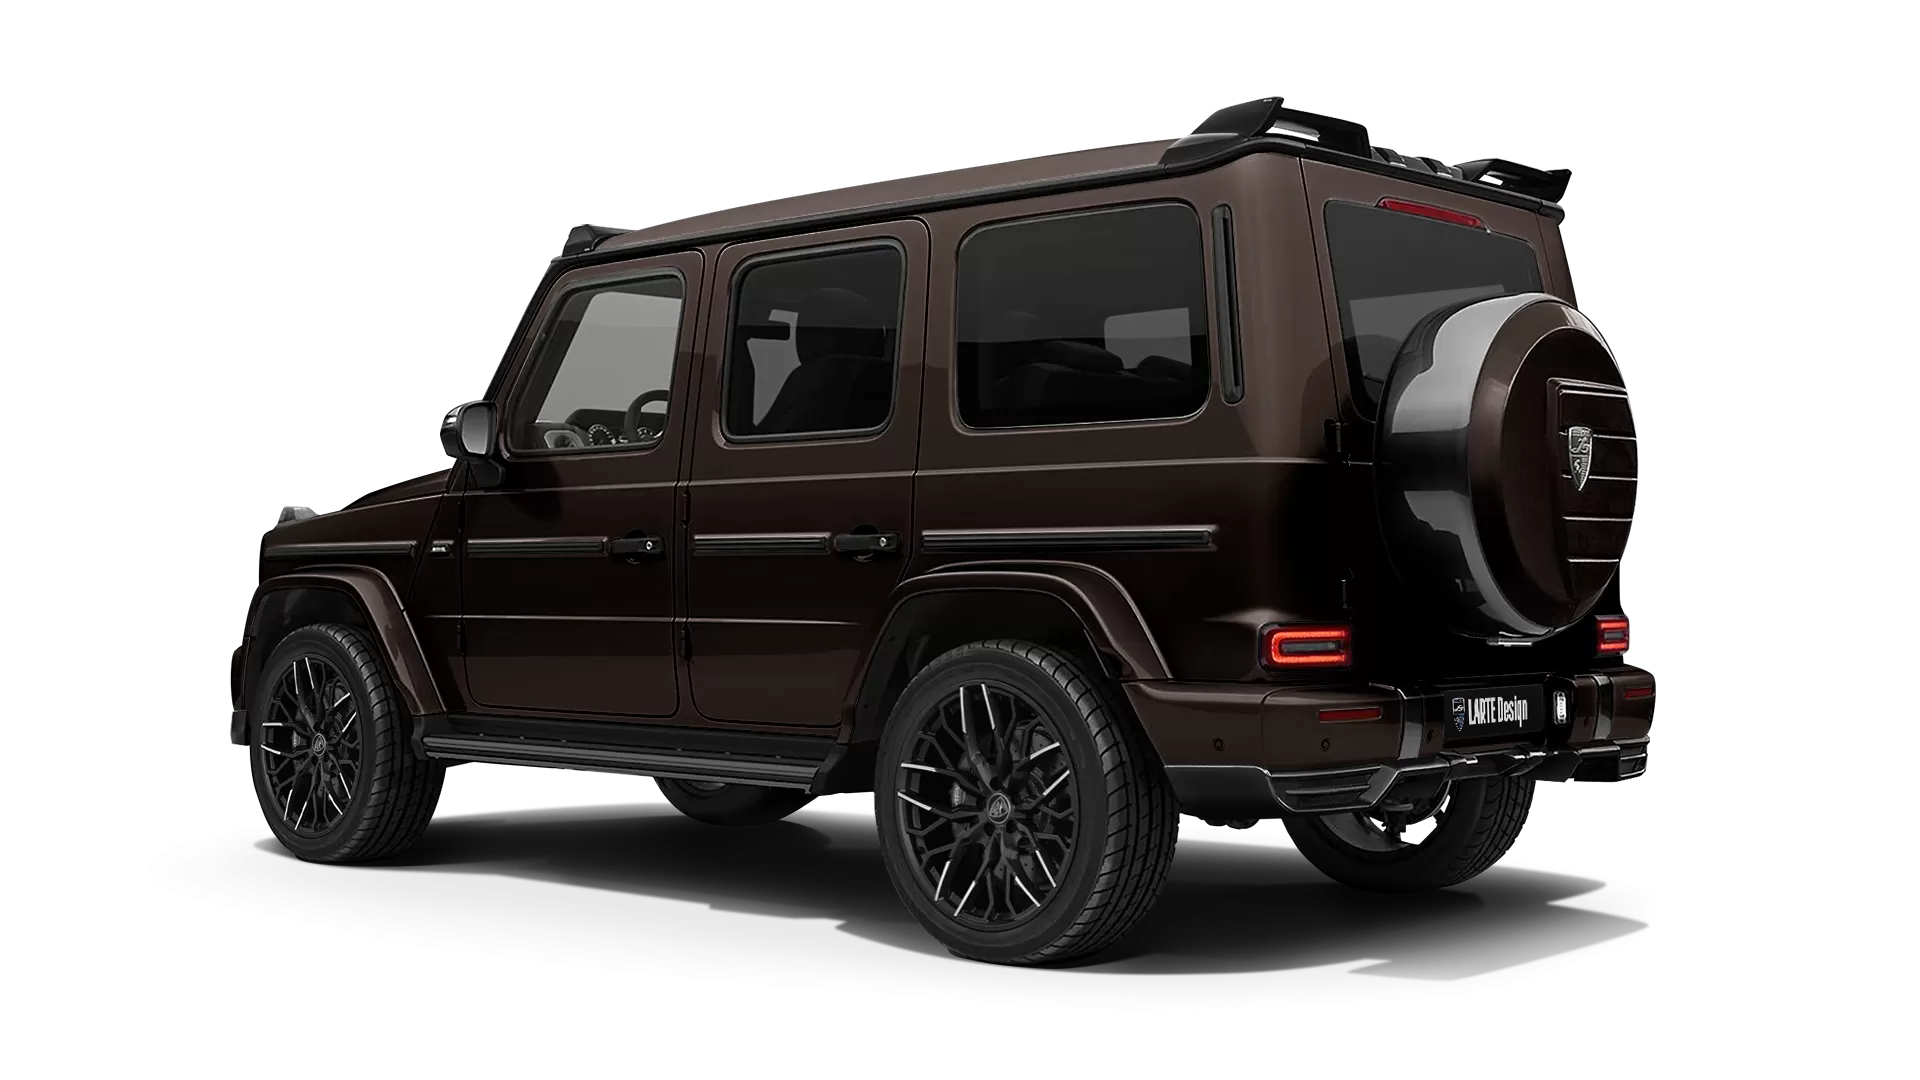 Mercedes G class W463 with painted body kit: rear view shown in Citrine Brown